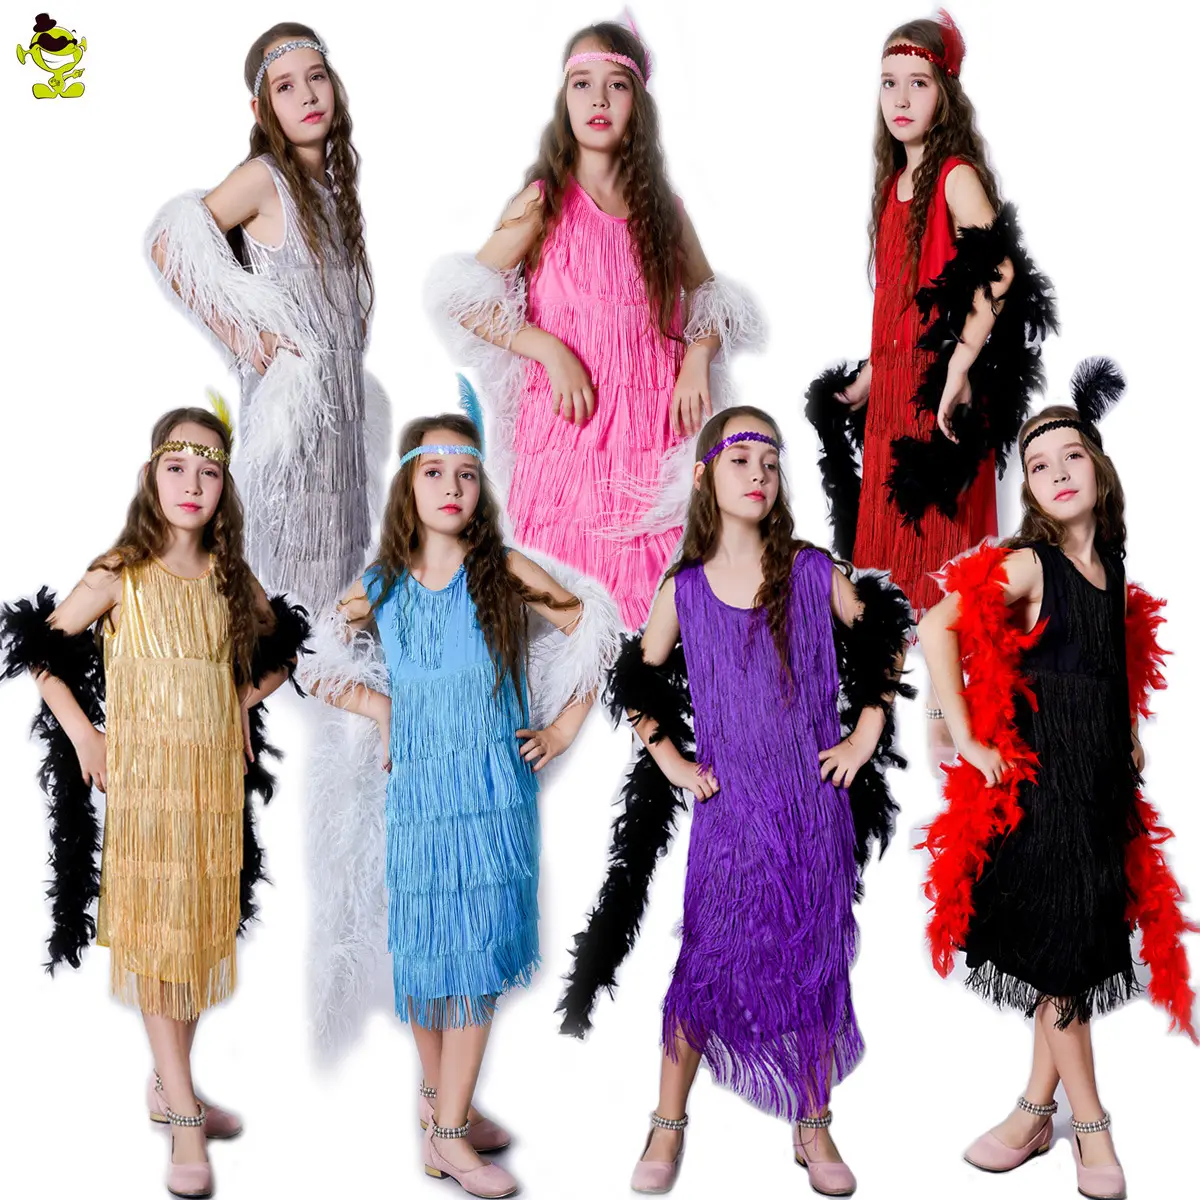 Elegant Children Retro Latin Dance Costume with Fringe Skirt for Girls jazz Party dress and Stage Performance wear